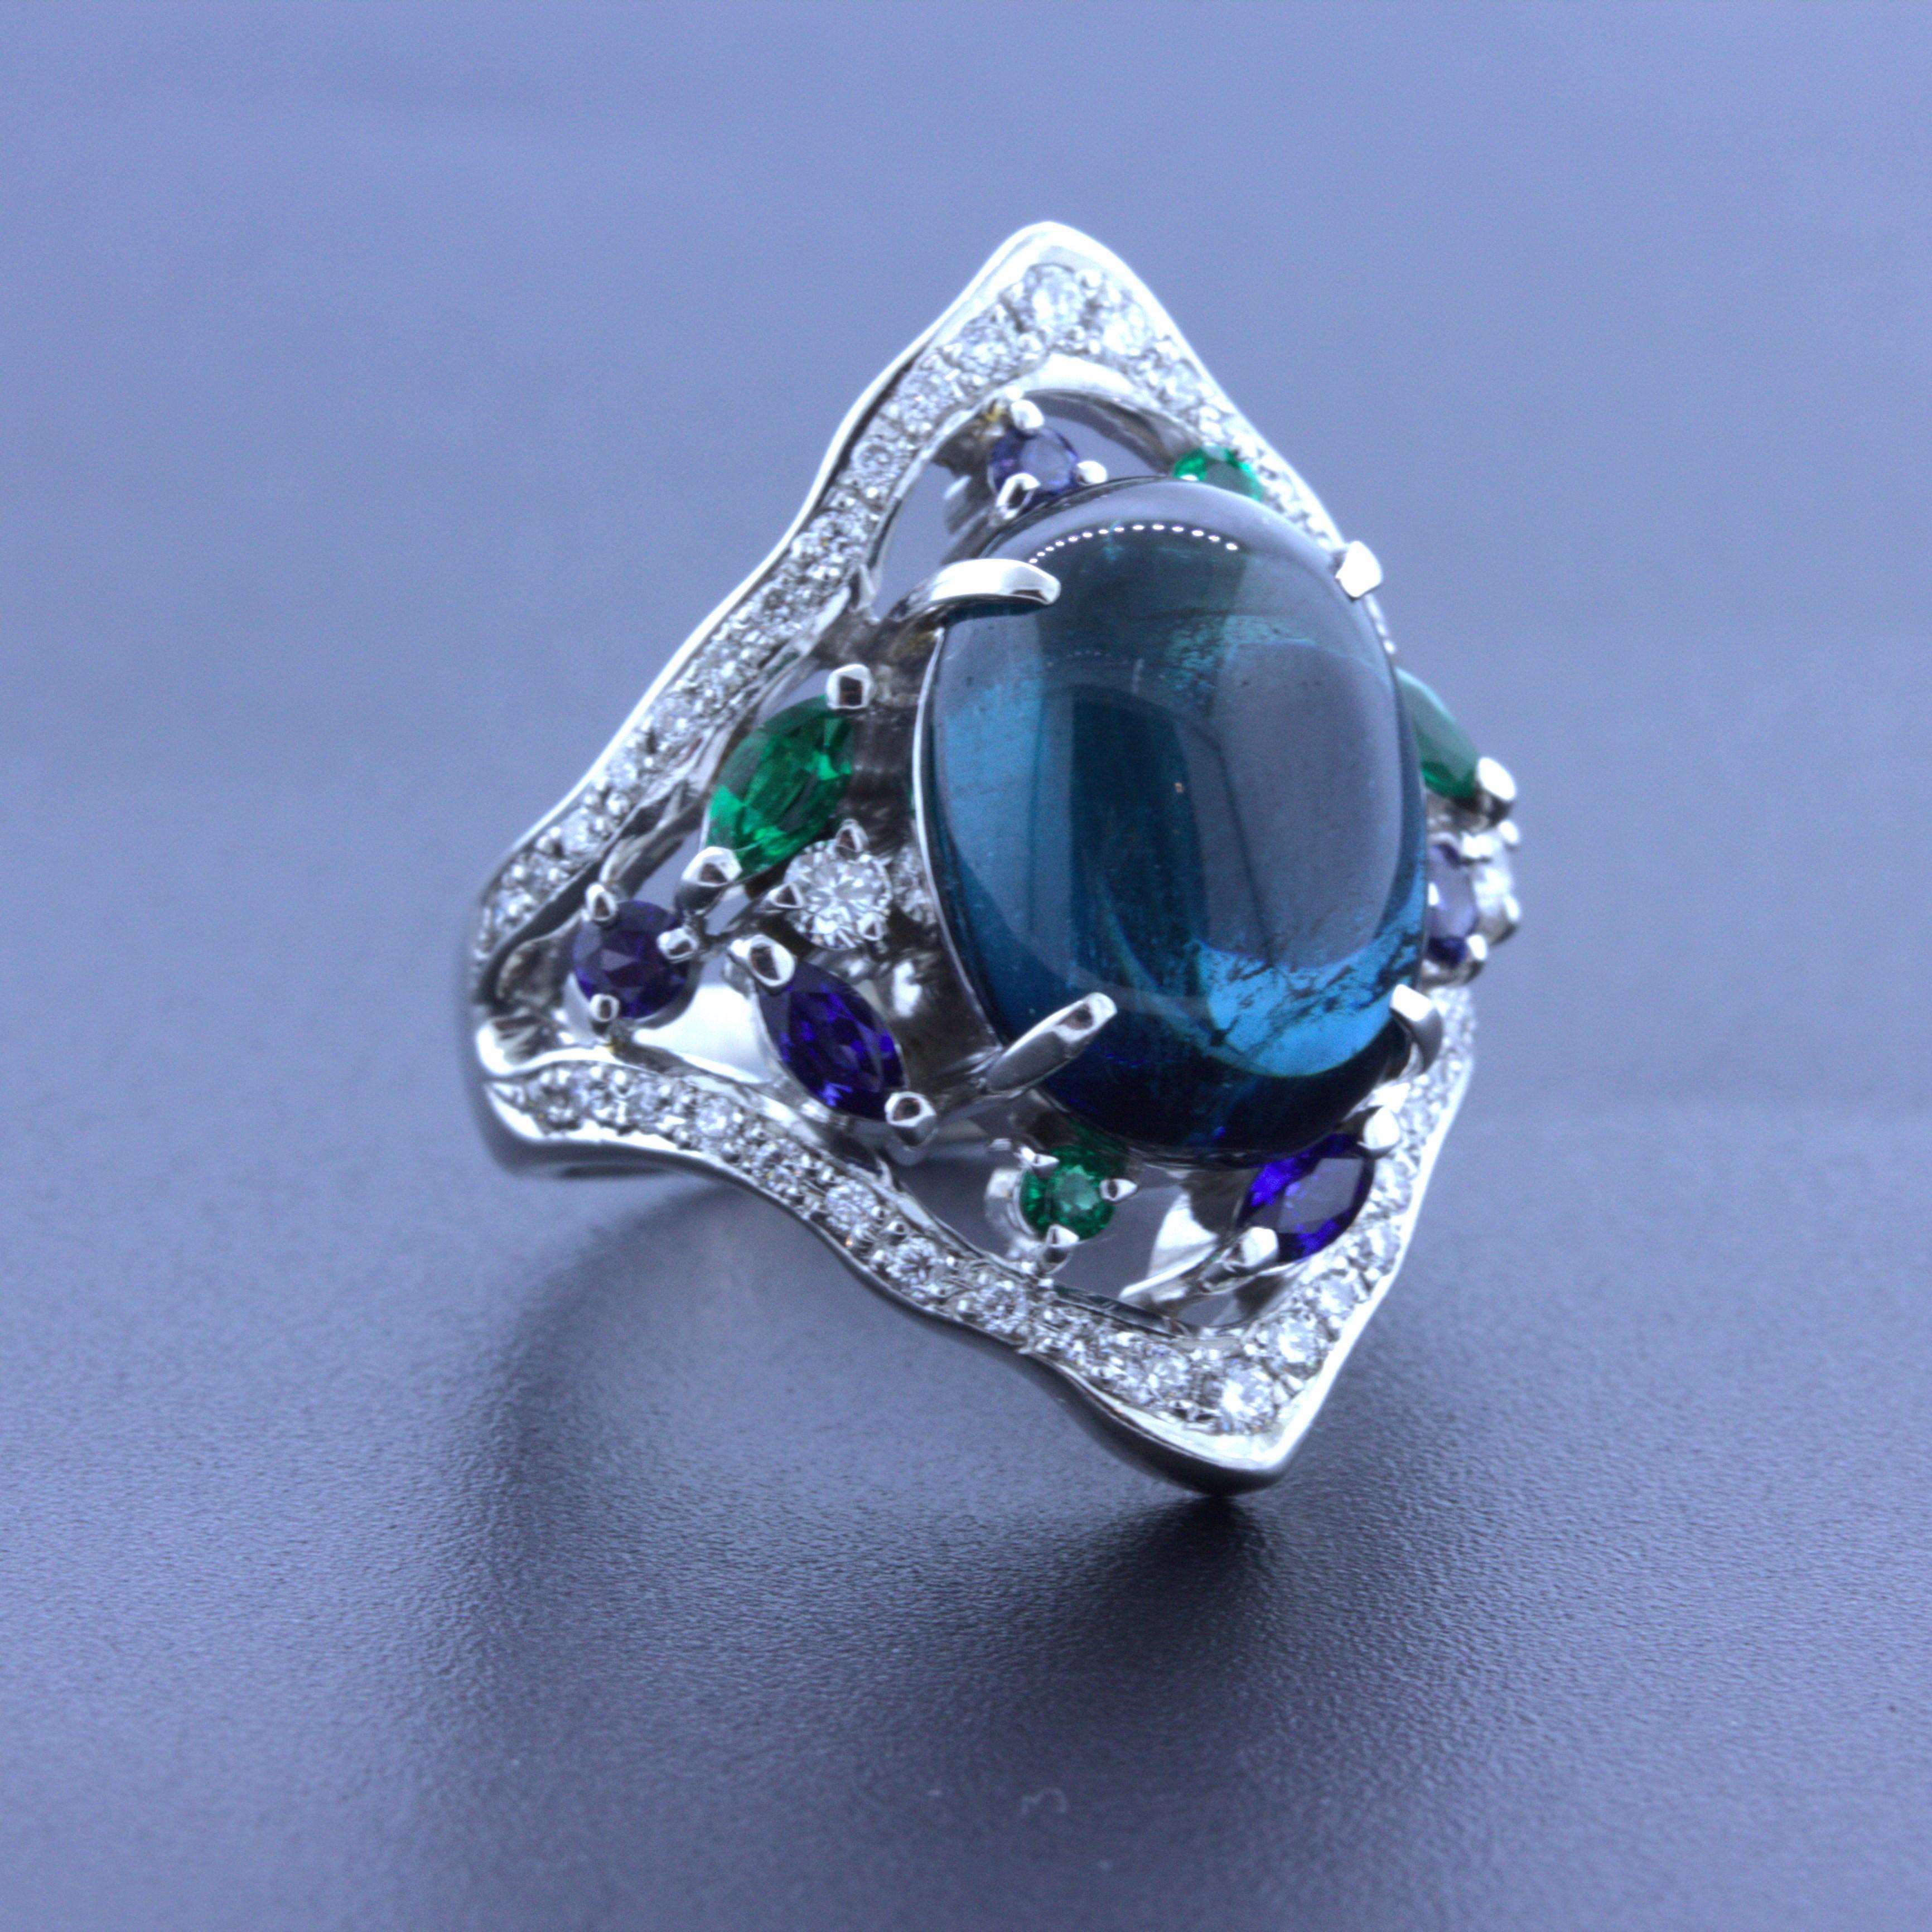 An elegant platinum ring featuring a 7.32 carat indicolite tourmaline. It has the ideal rich slightly greenish-blue color that makes this gem so popular. It is complemented by round and marquise-shape emeralds and sapphires set around the tourmaline